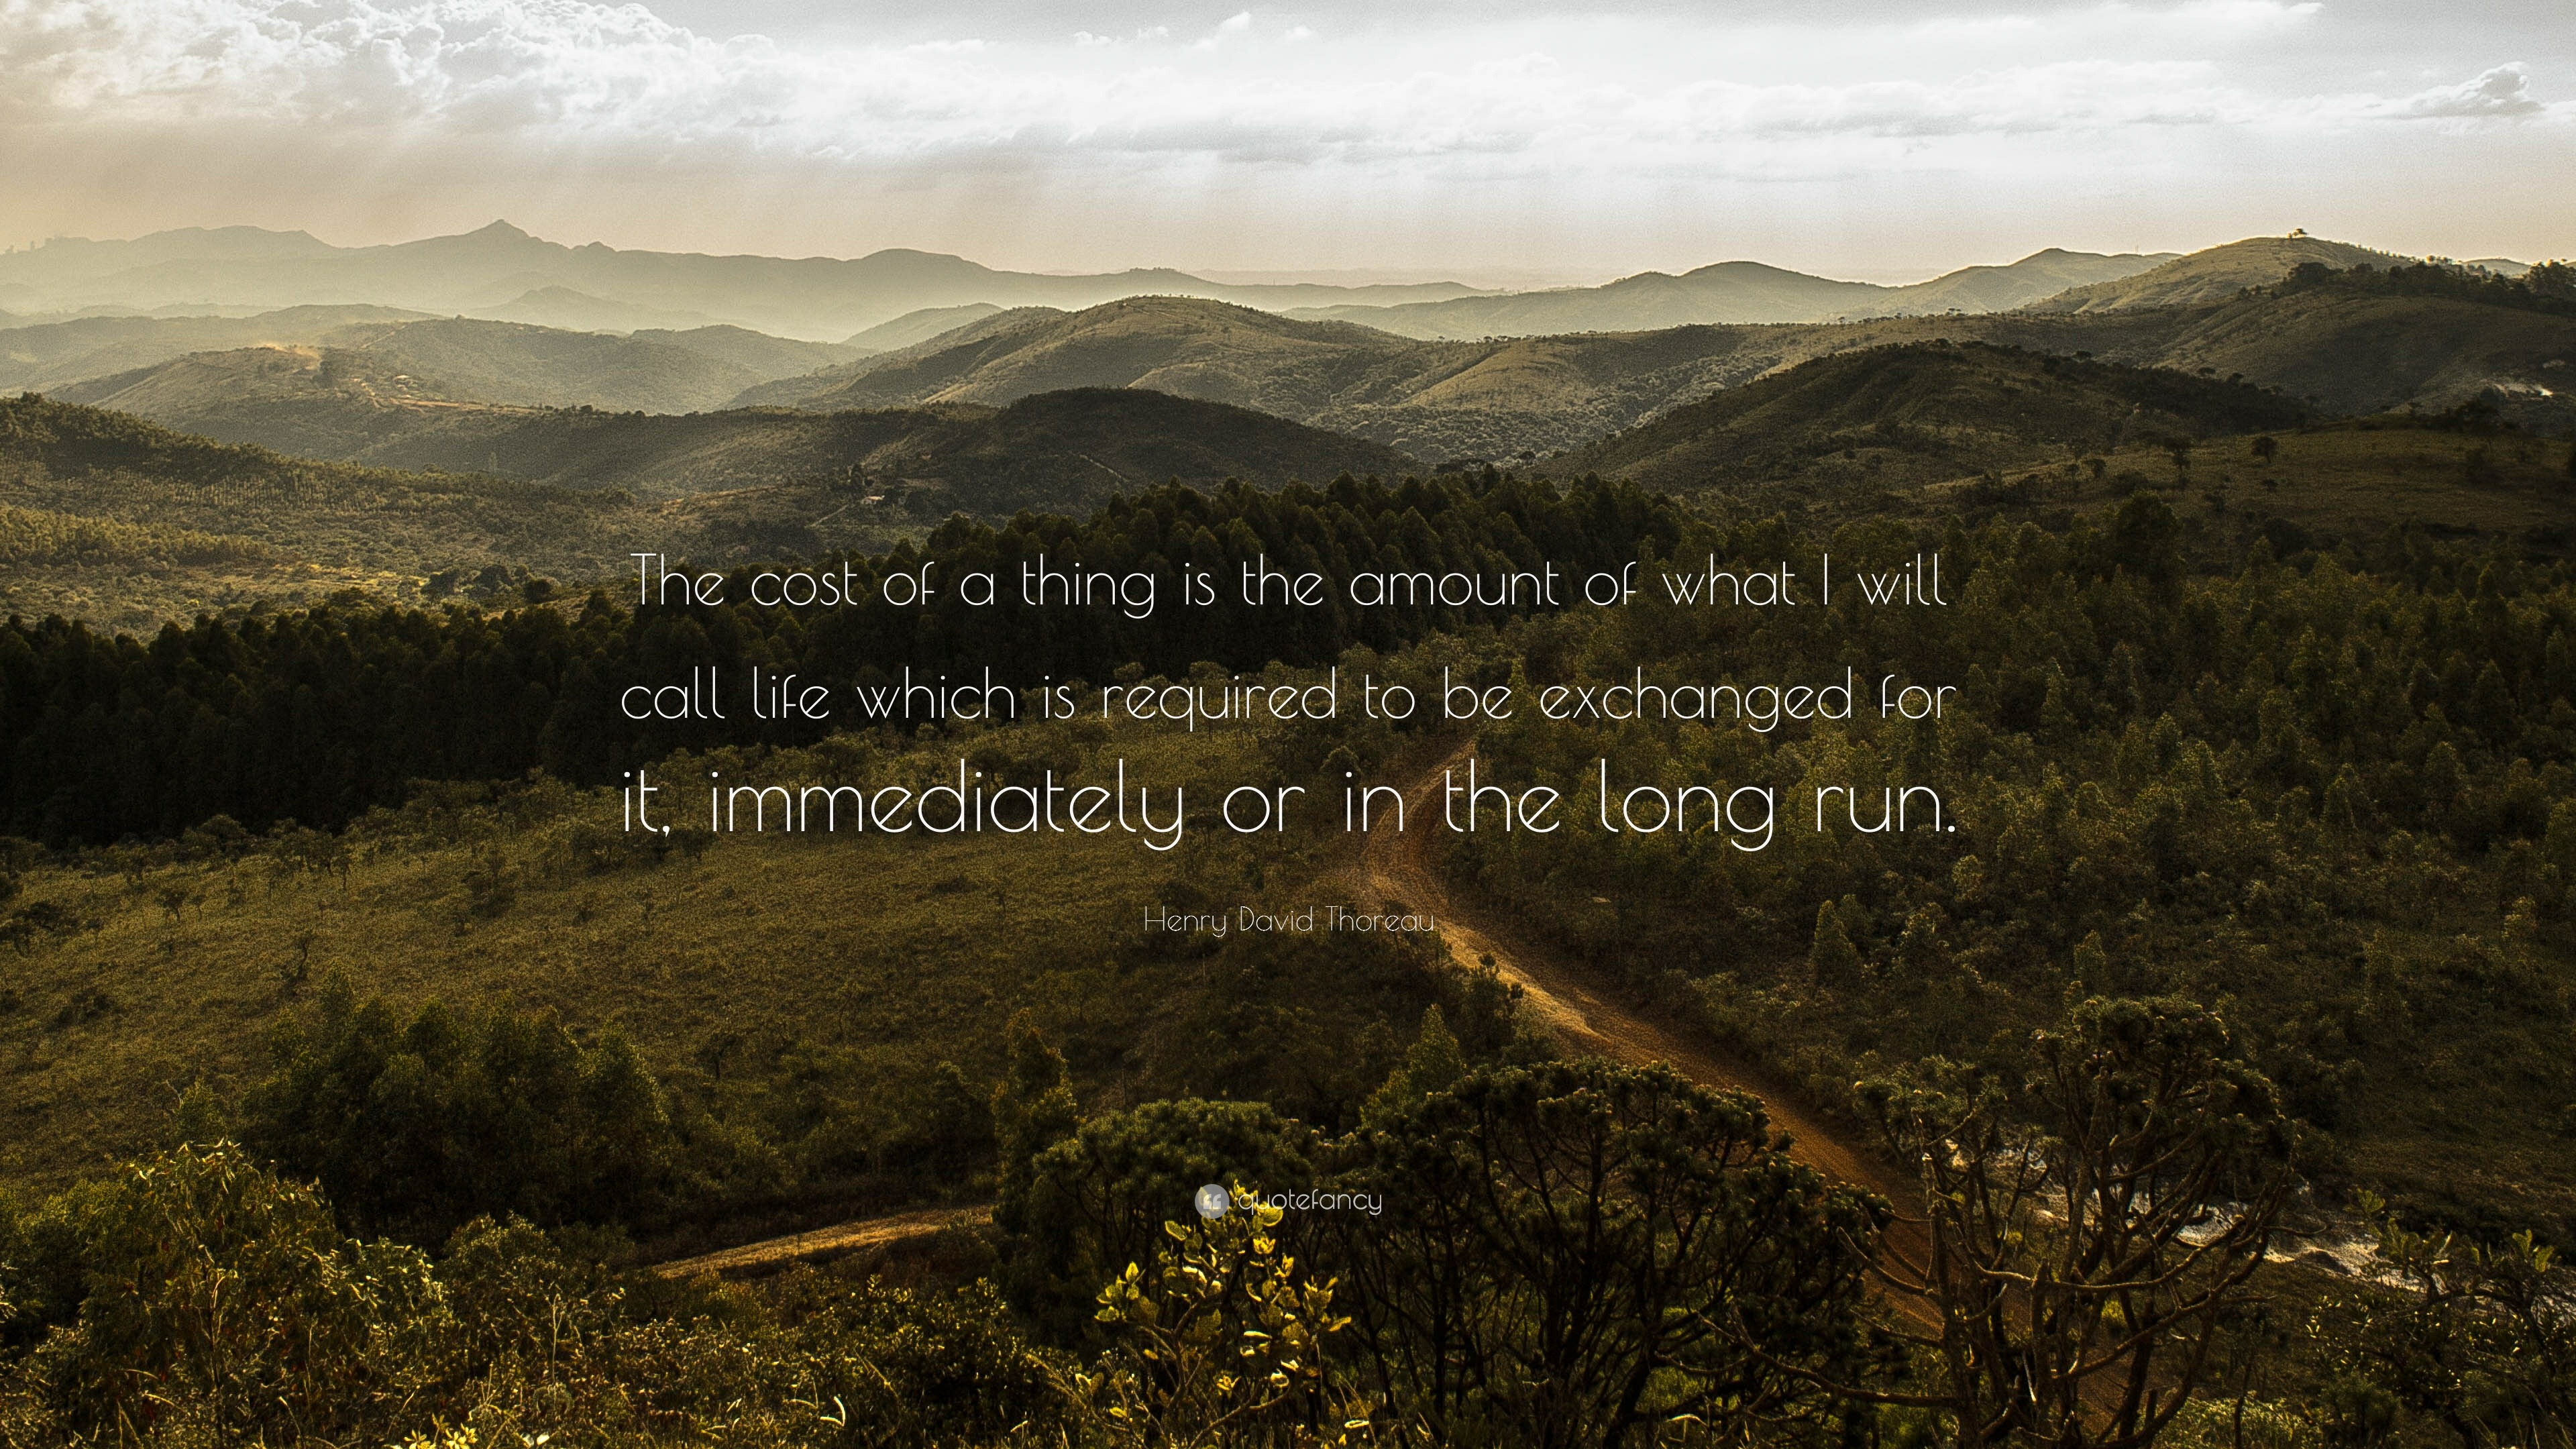 Henry David Thoreau Quote: “The cost of a thing is the amount of what I ...